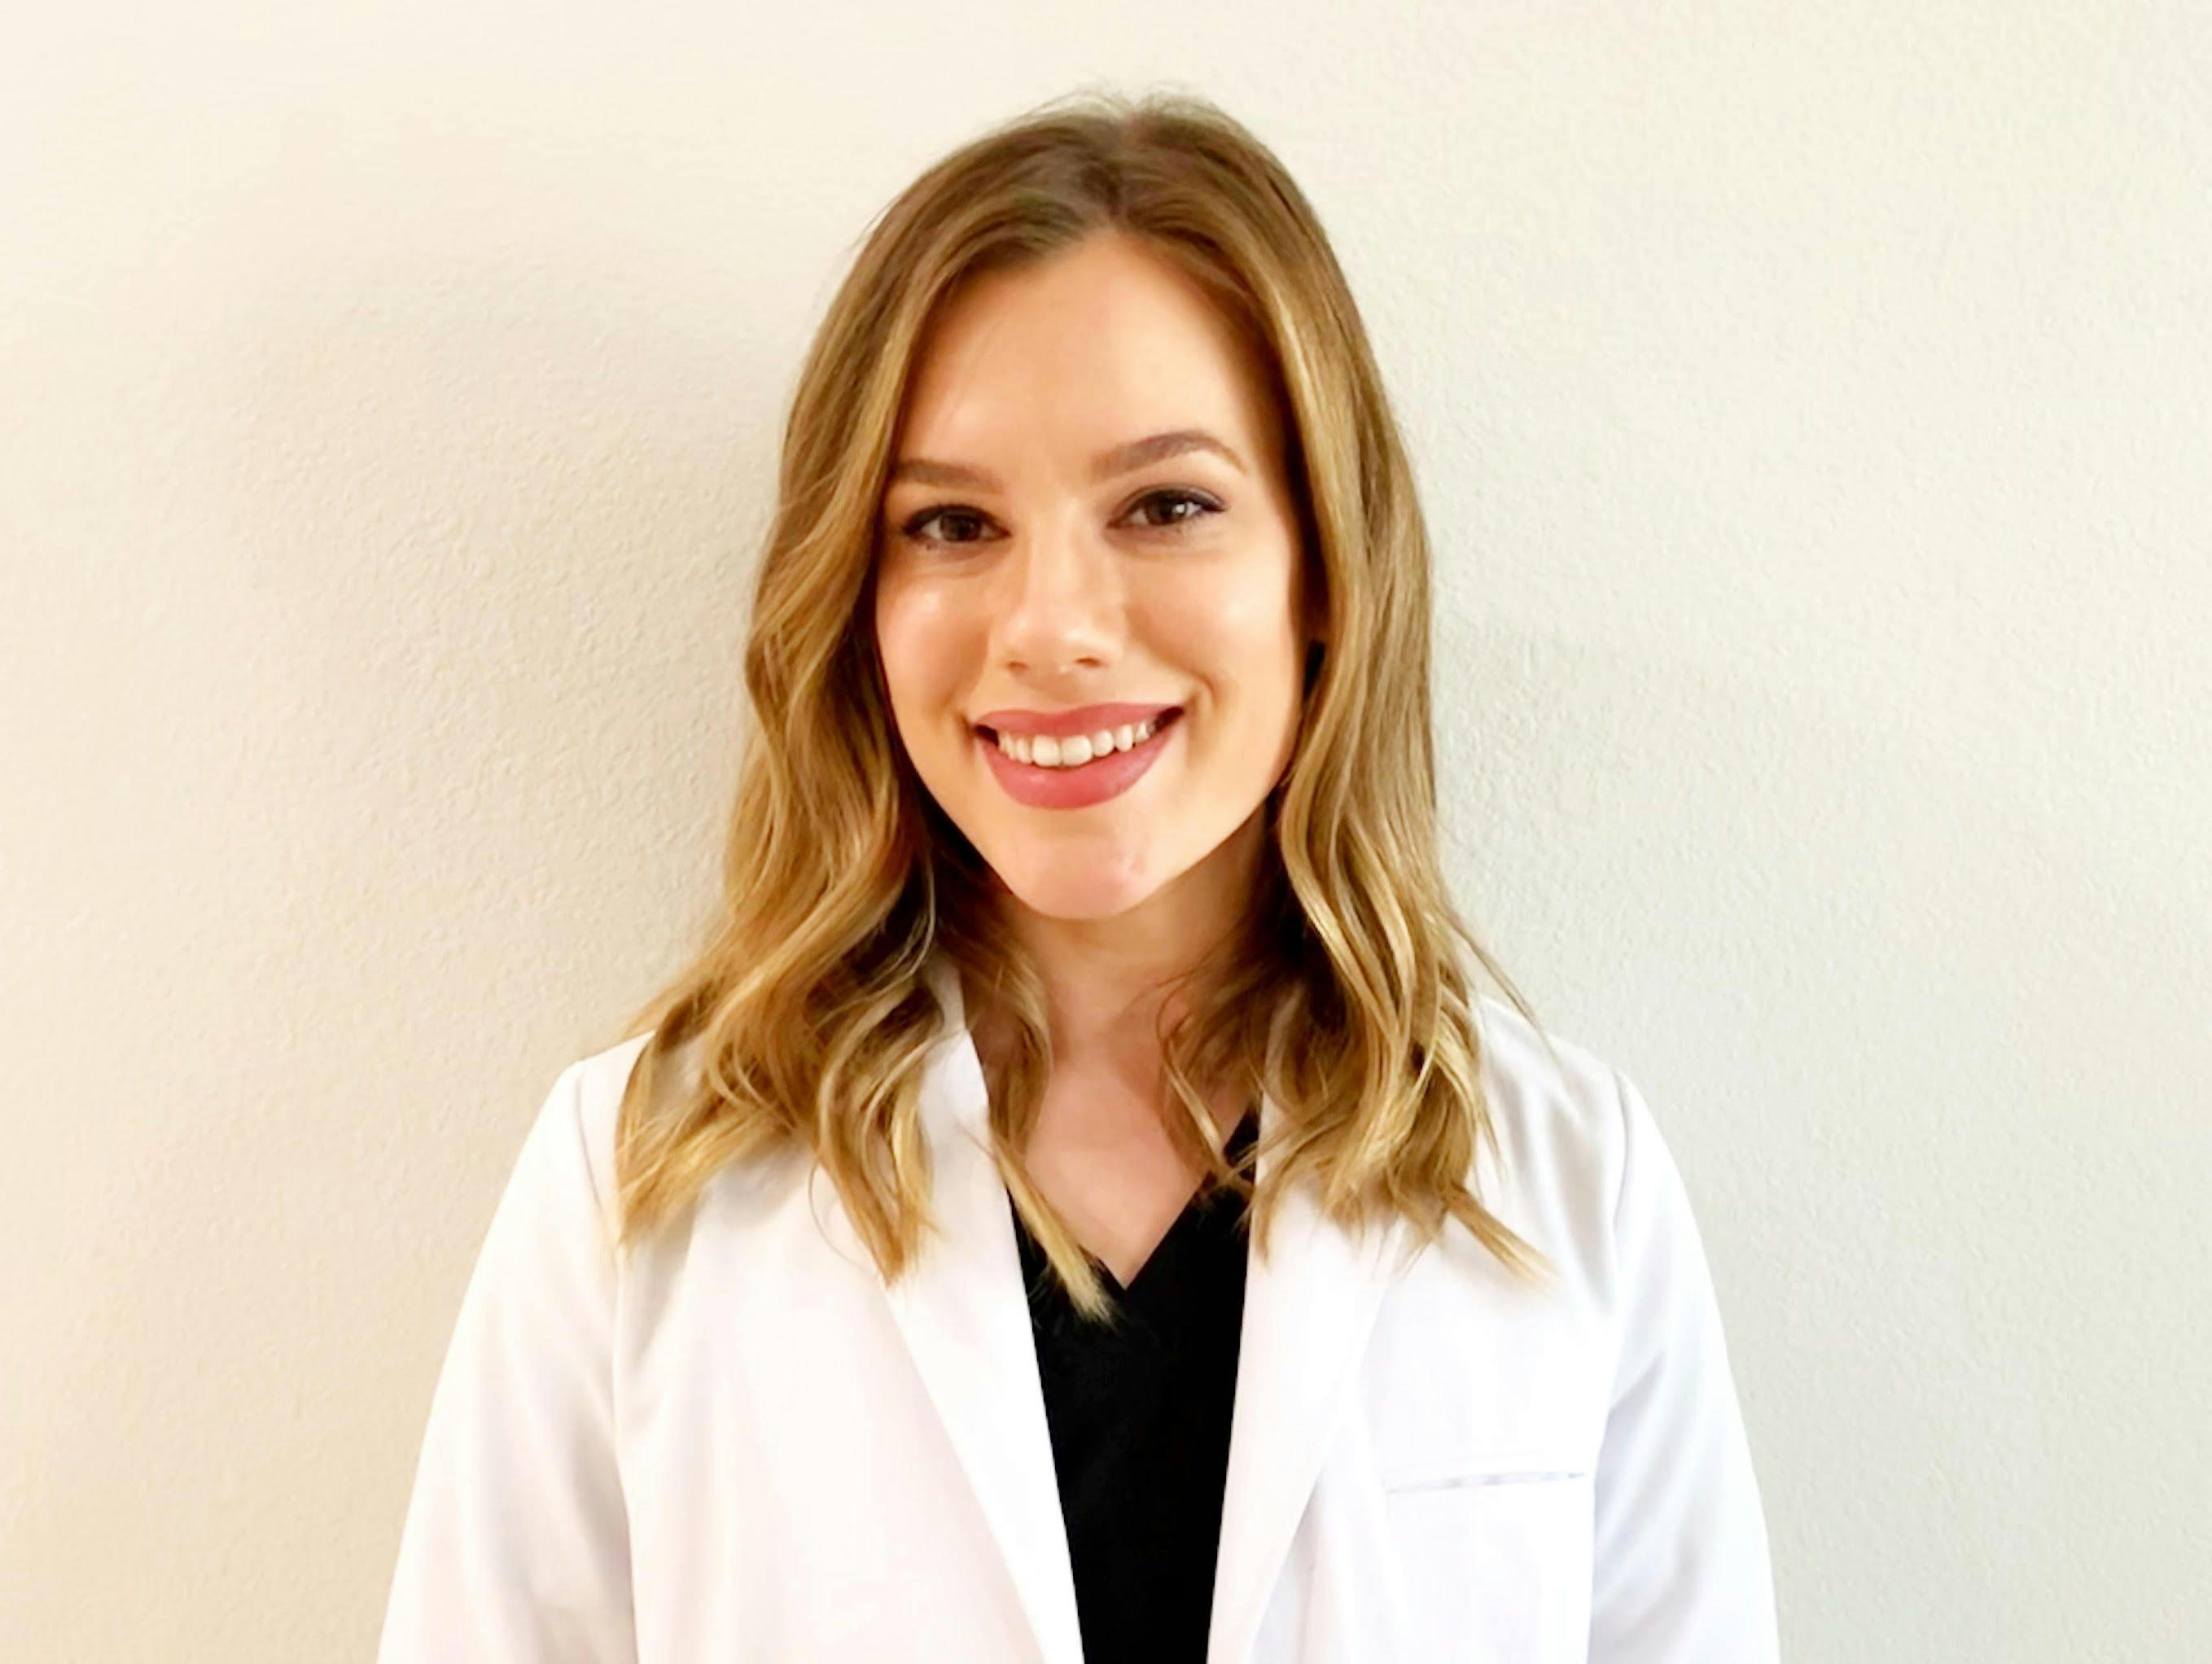 Meet the Aesthetic Expert with Dr. Will Kirby: Emily Kaye Perbellini, MSN, FNP-C